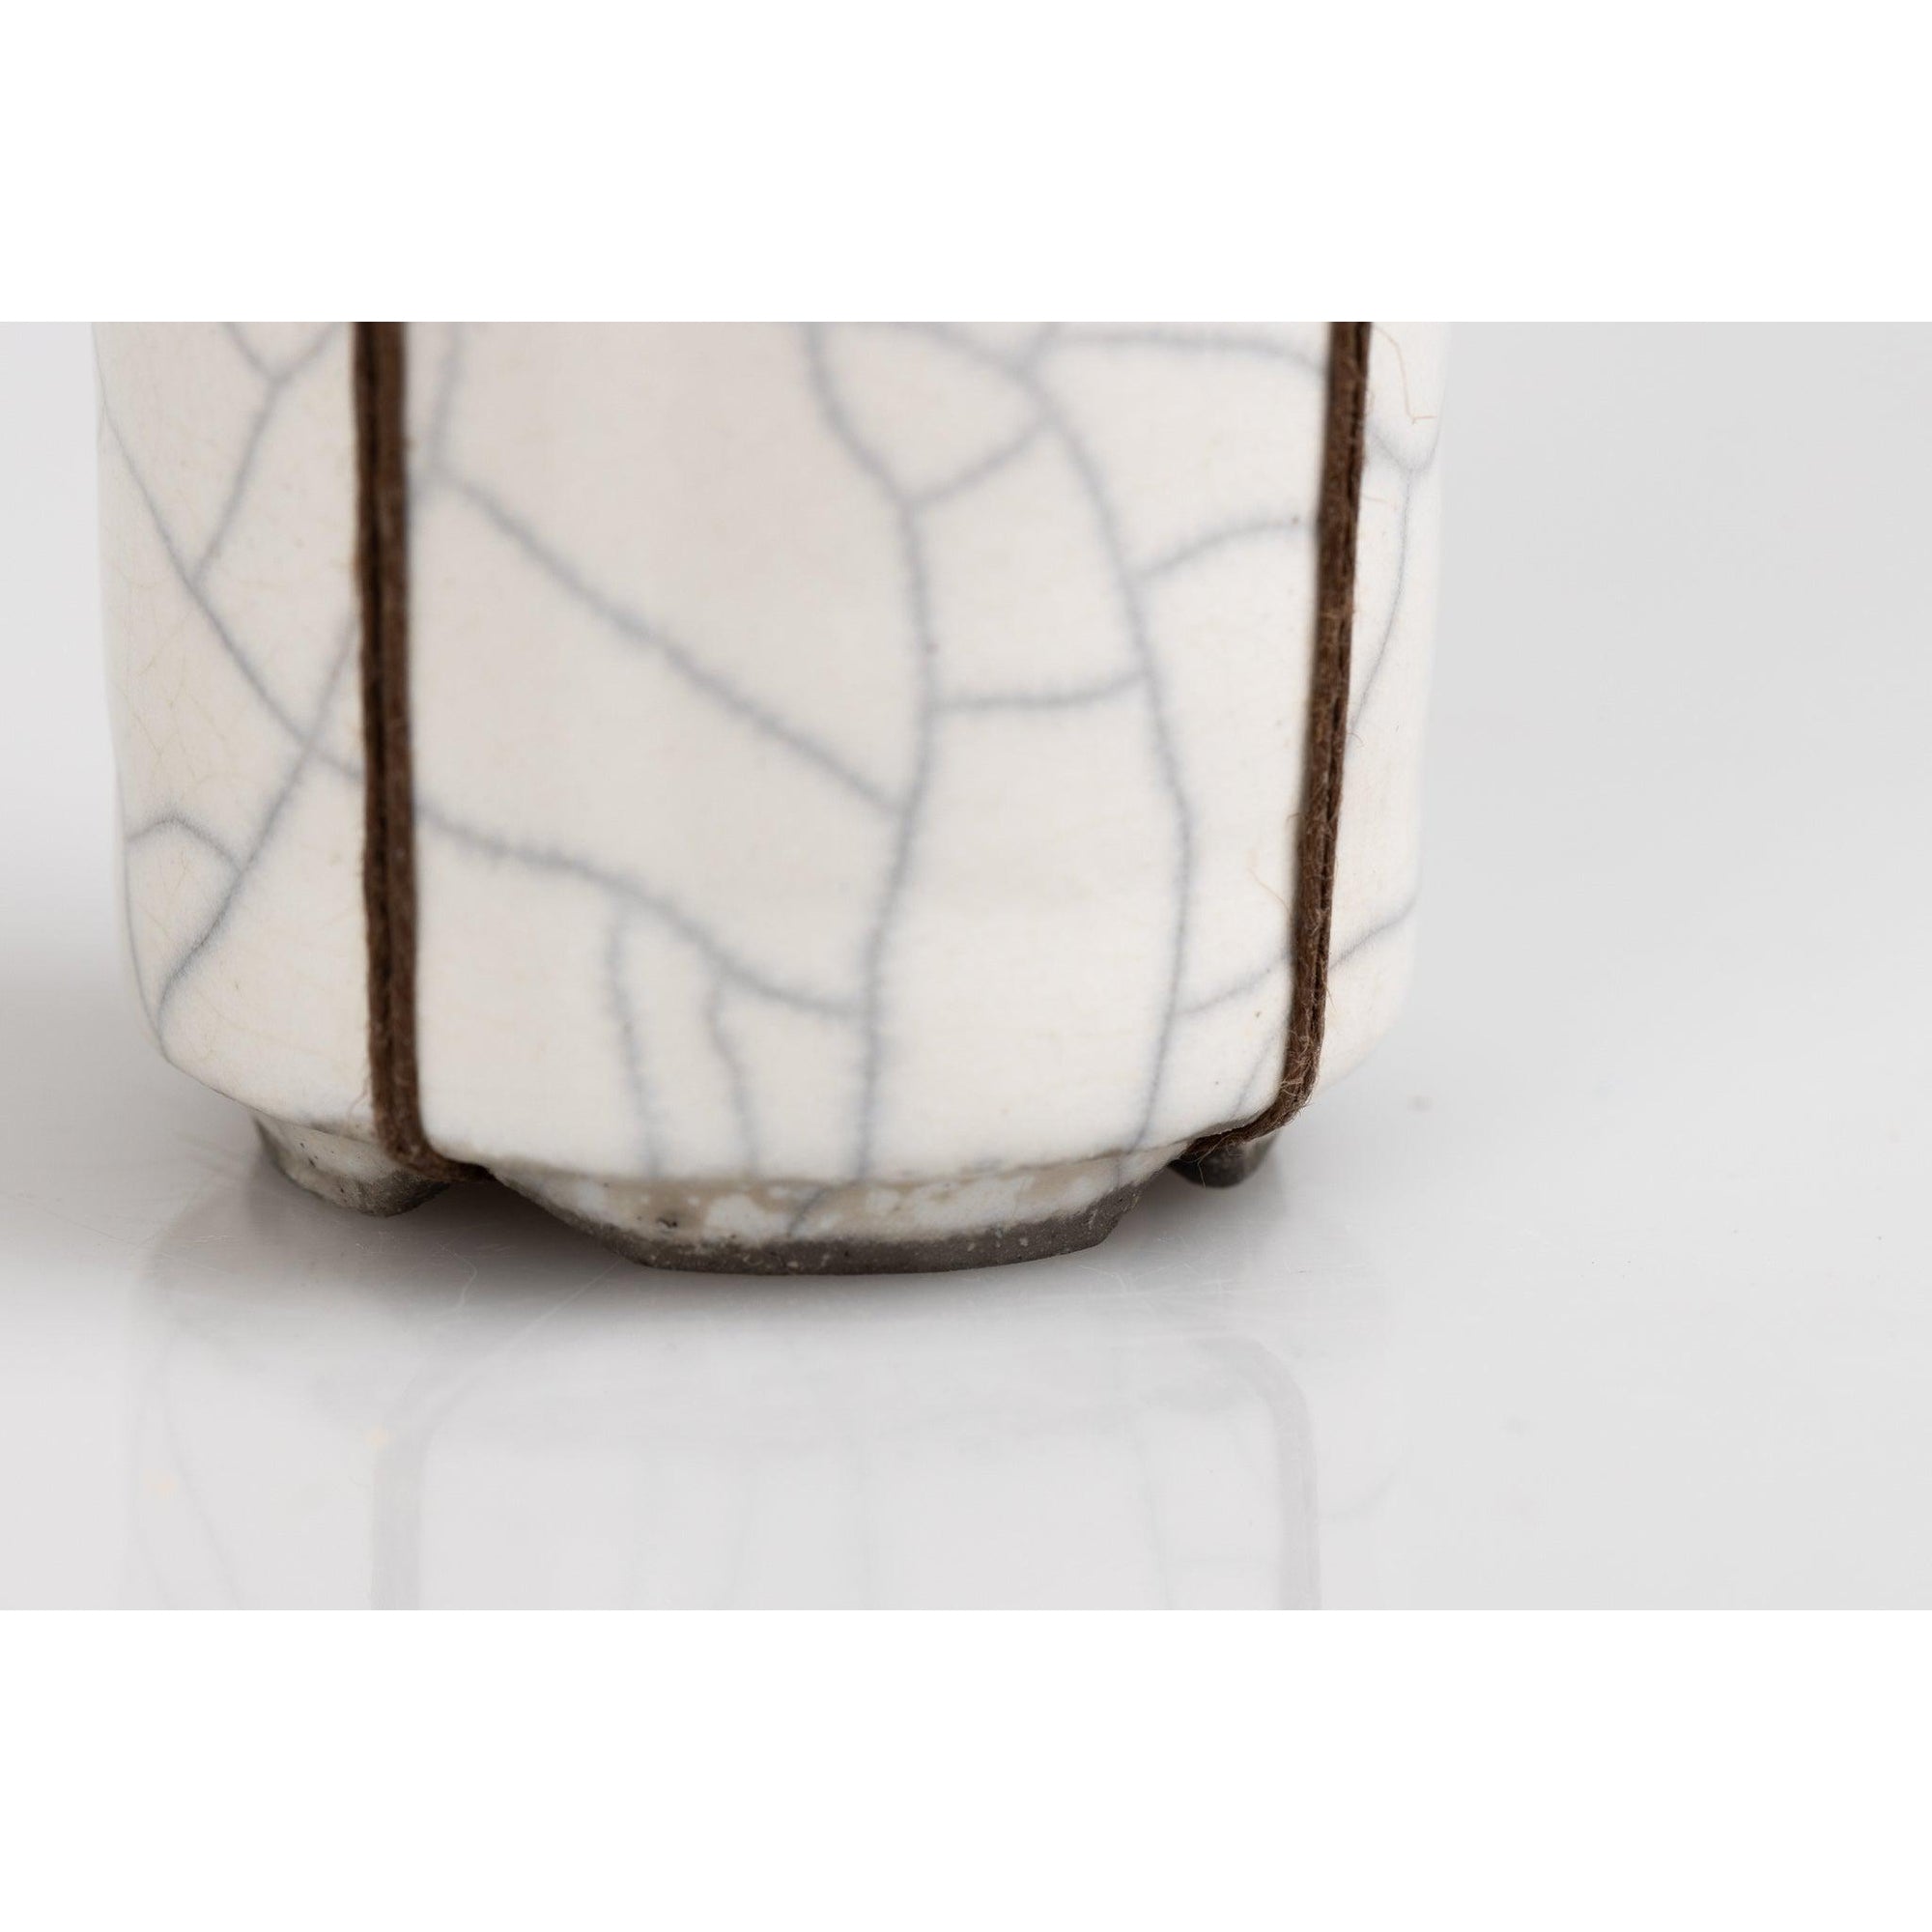 KSEE1 Raku Bound Container by Kate Schuricht, available at Padstow Gallery, Cornwall